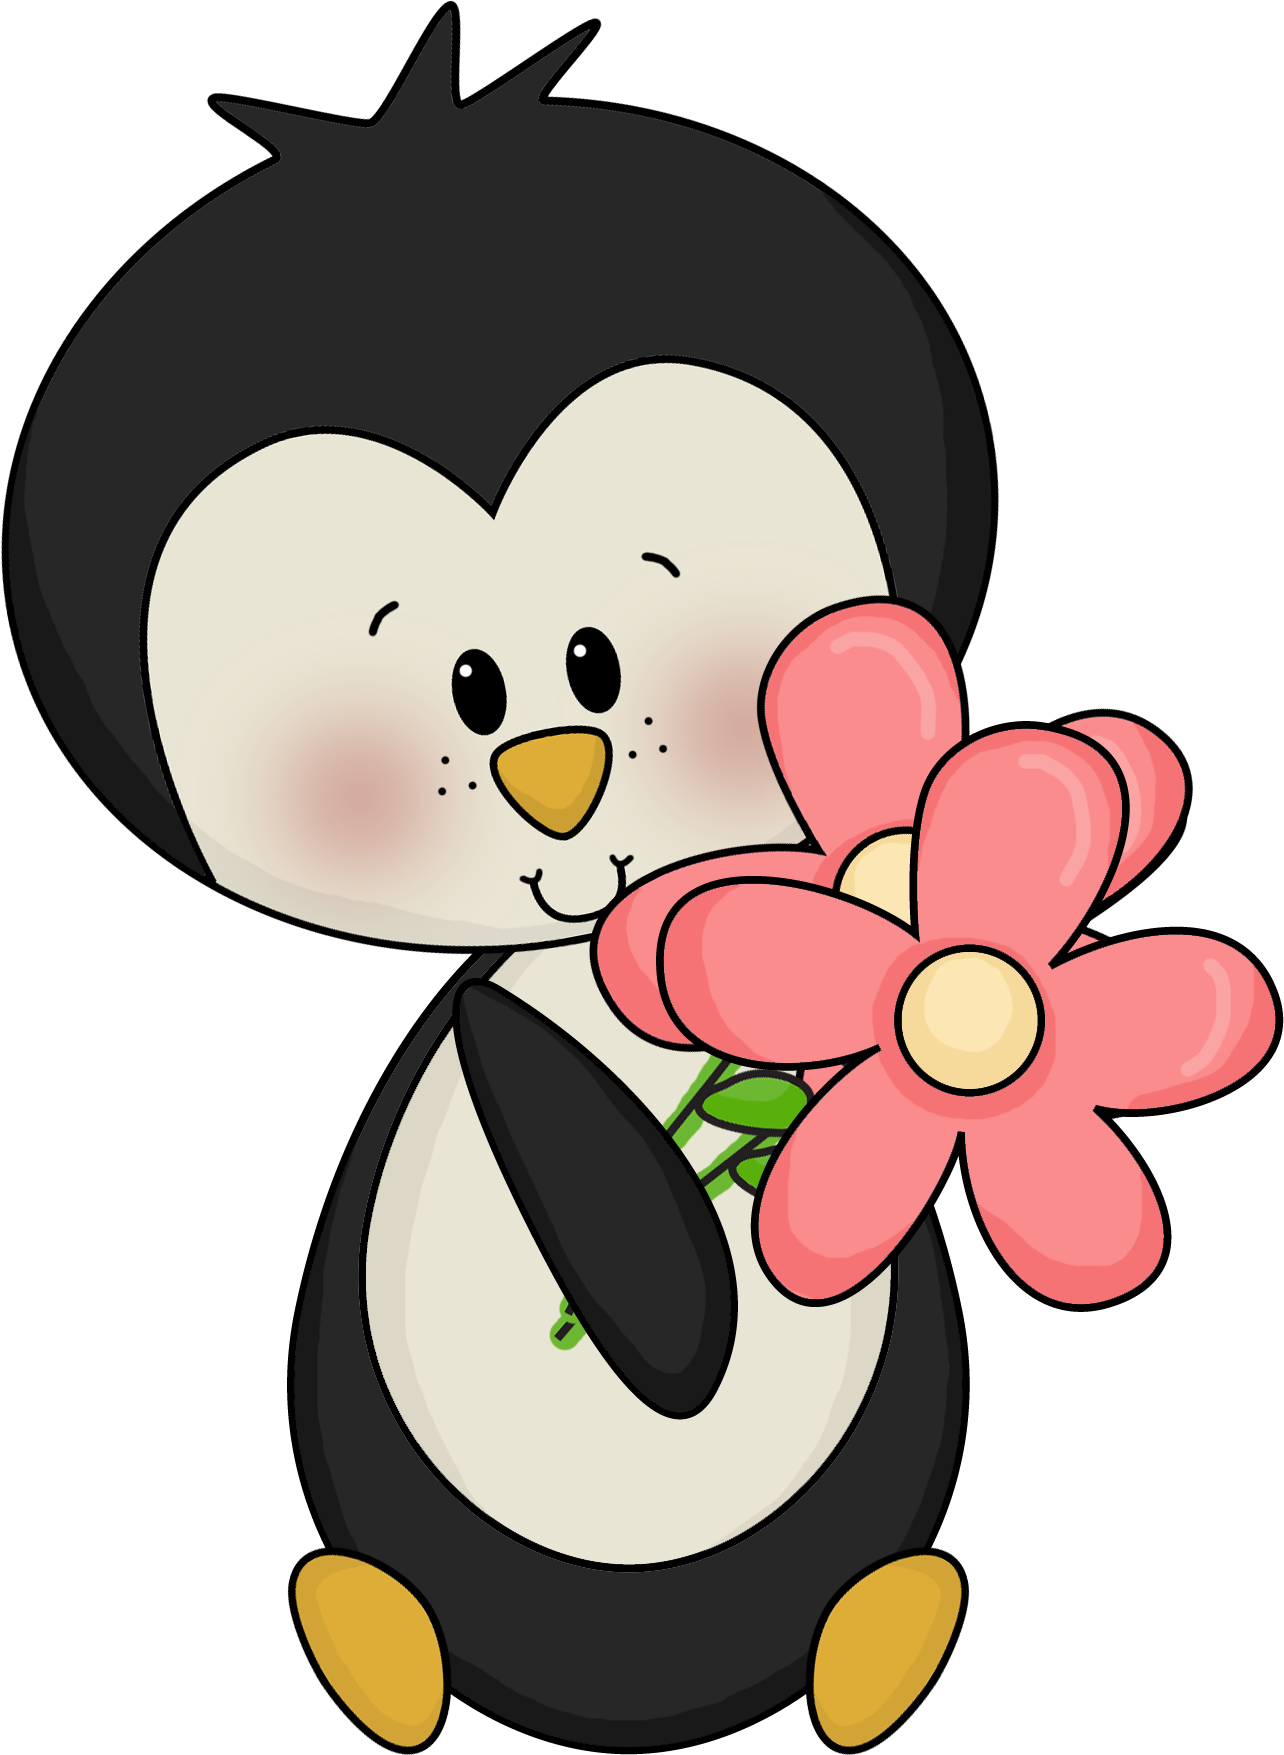 Photo By @daniellemoraesfalcao - Penguin With Flowers Clipart (1284x1755)